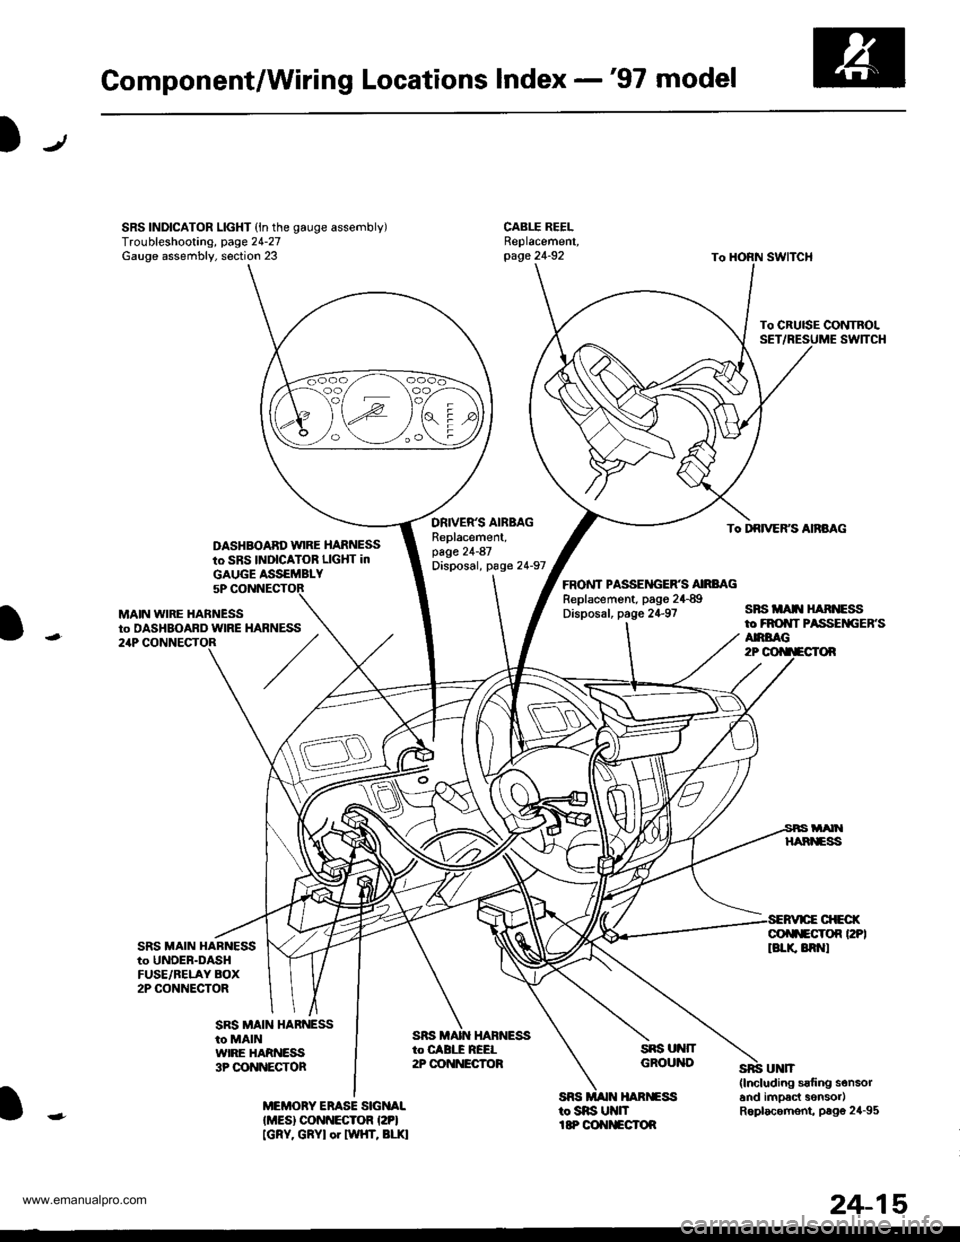 HONDA CR-V 2000 RD1-RD3 / 1.G Owners Manual 
Component/Wiring Locations Index -97 model
SRS INDICATOR LIGHT (ln the gauge assembly)Troubleshooting, page 24-27Gauge assembly, section 23
DASHBOABD w|RE HARNESS
to SBS INDICATOR LIGHT in
DRIVERS 